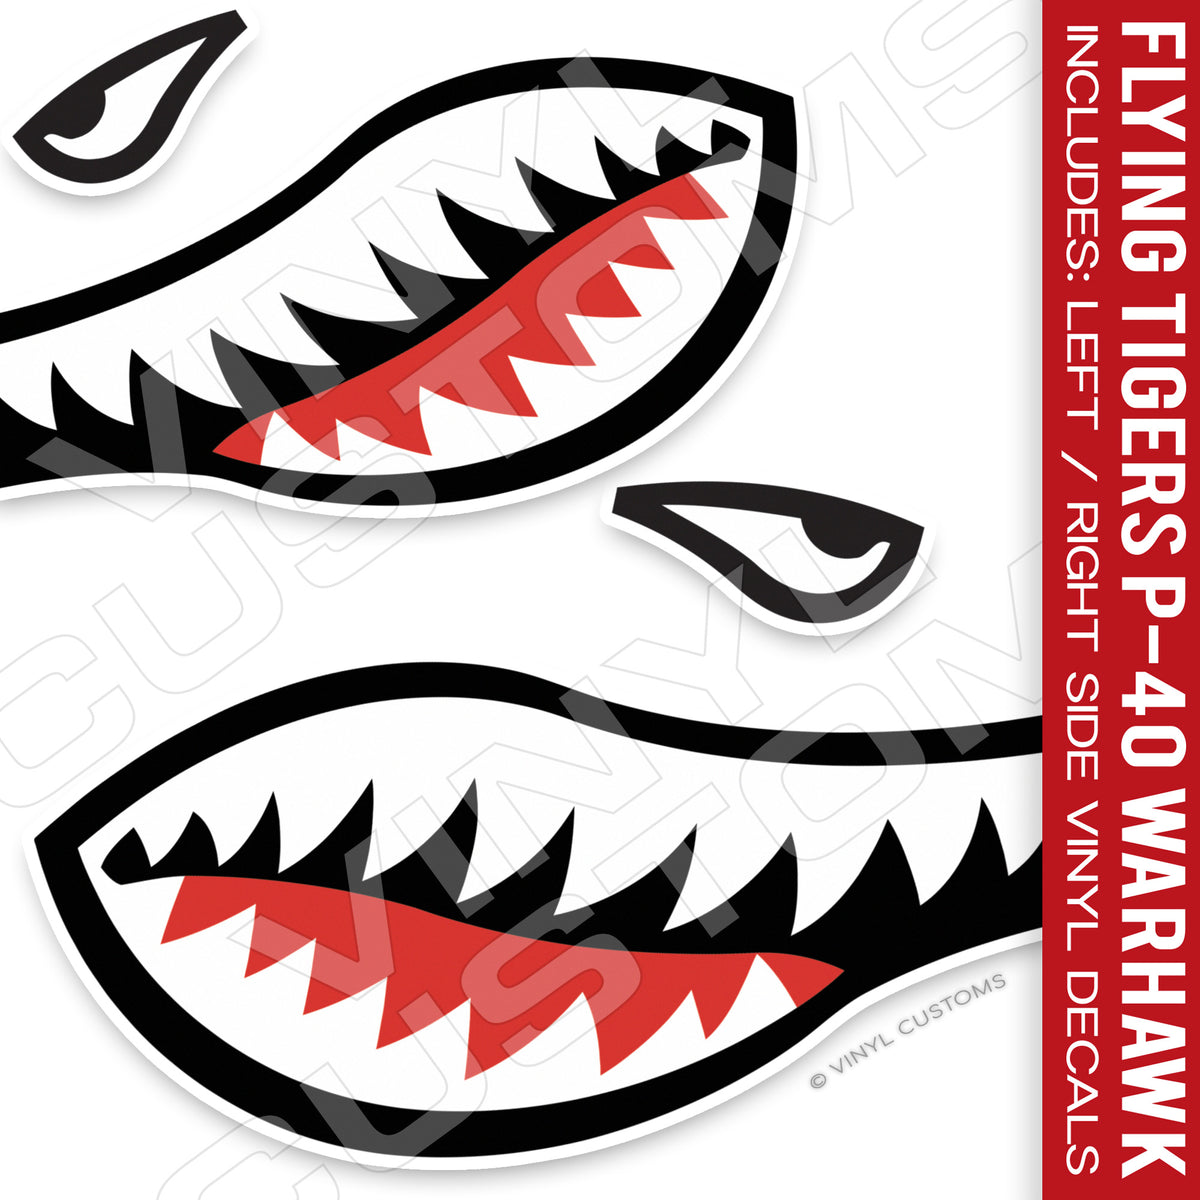 Flying Tigers decal approx 4" x 4" self adhesive vinyl left & right 